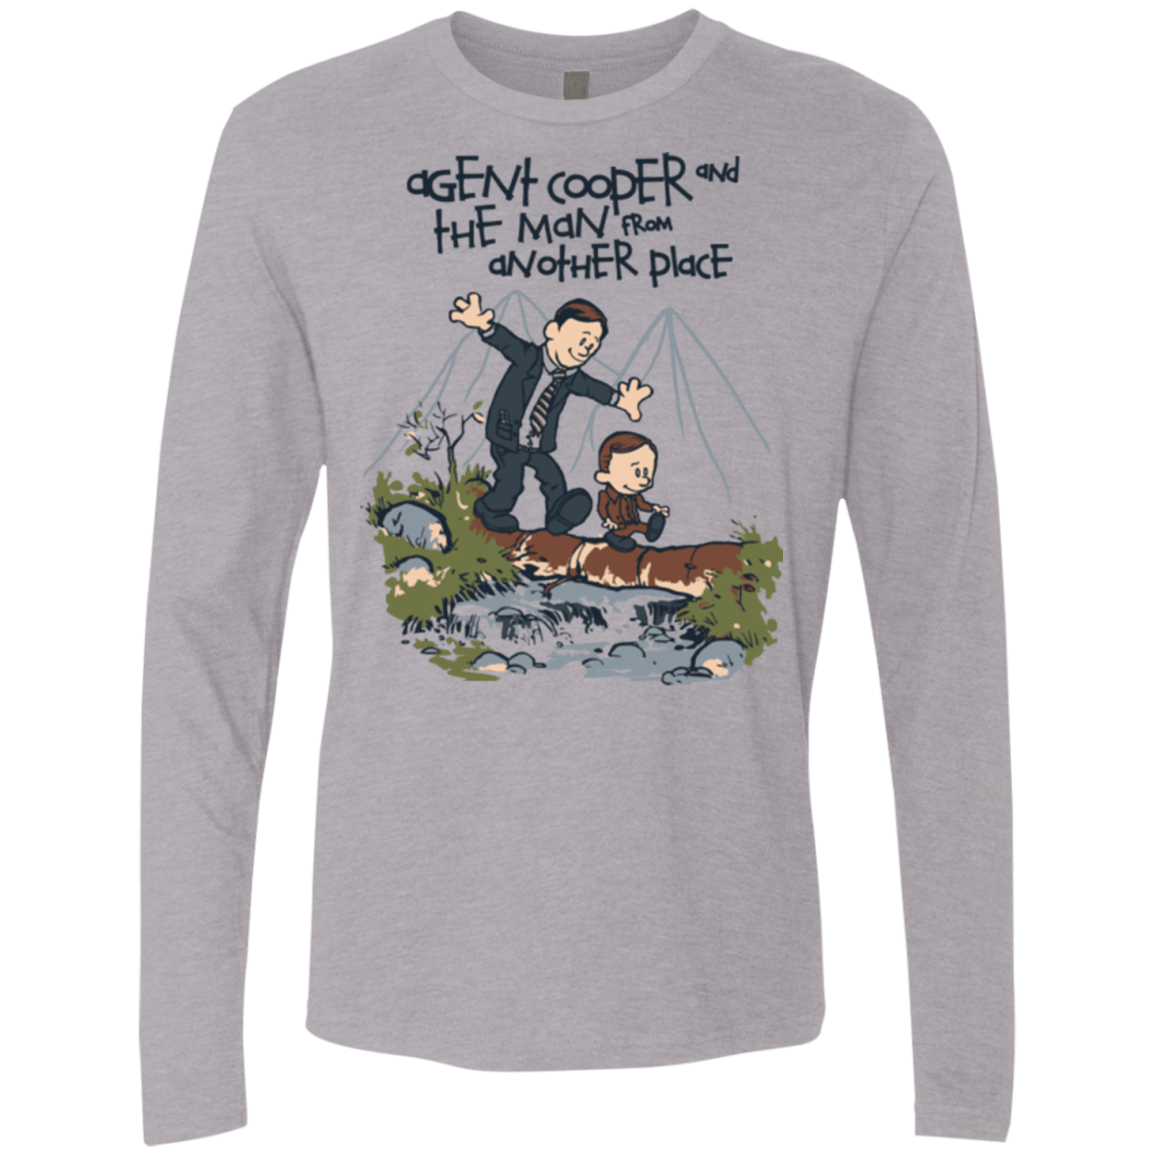 T-Shirts Heather Grey / Small Agent Cooper and Men's Premium Long Sleeve